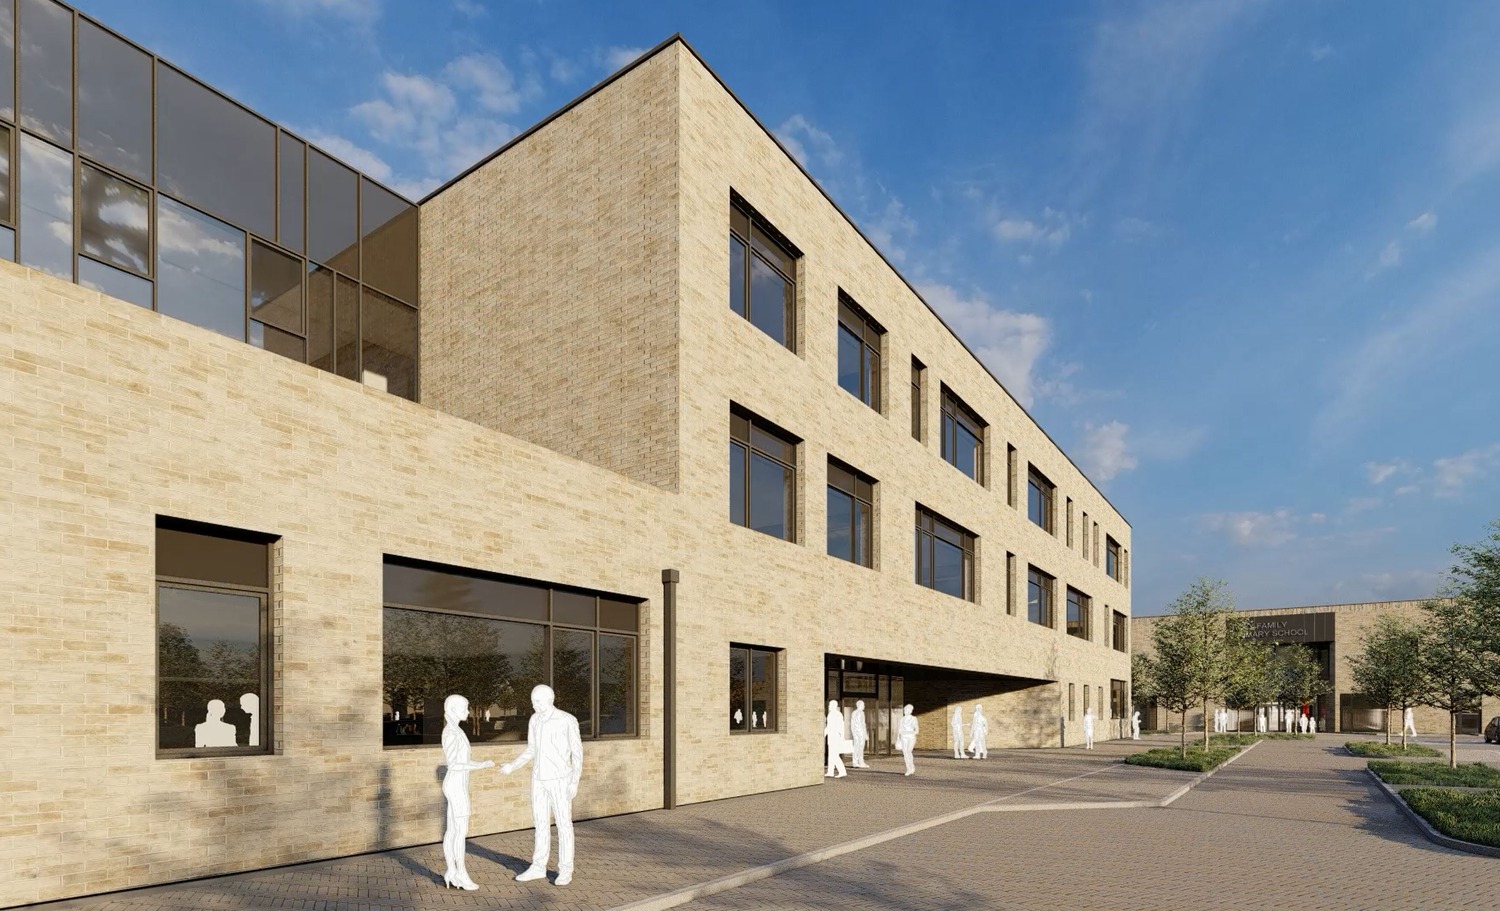 Morrison Construction secures £1.8m furniture and fit-out contract for Deanestor